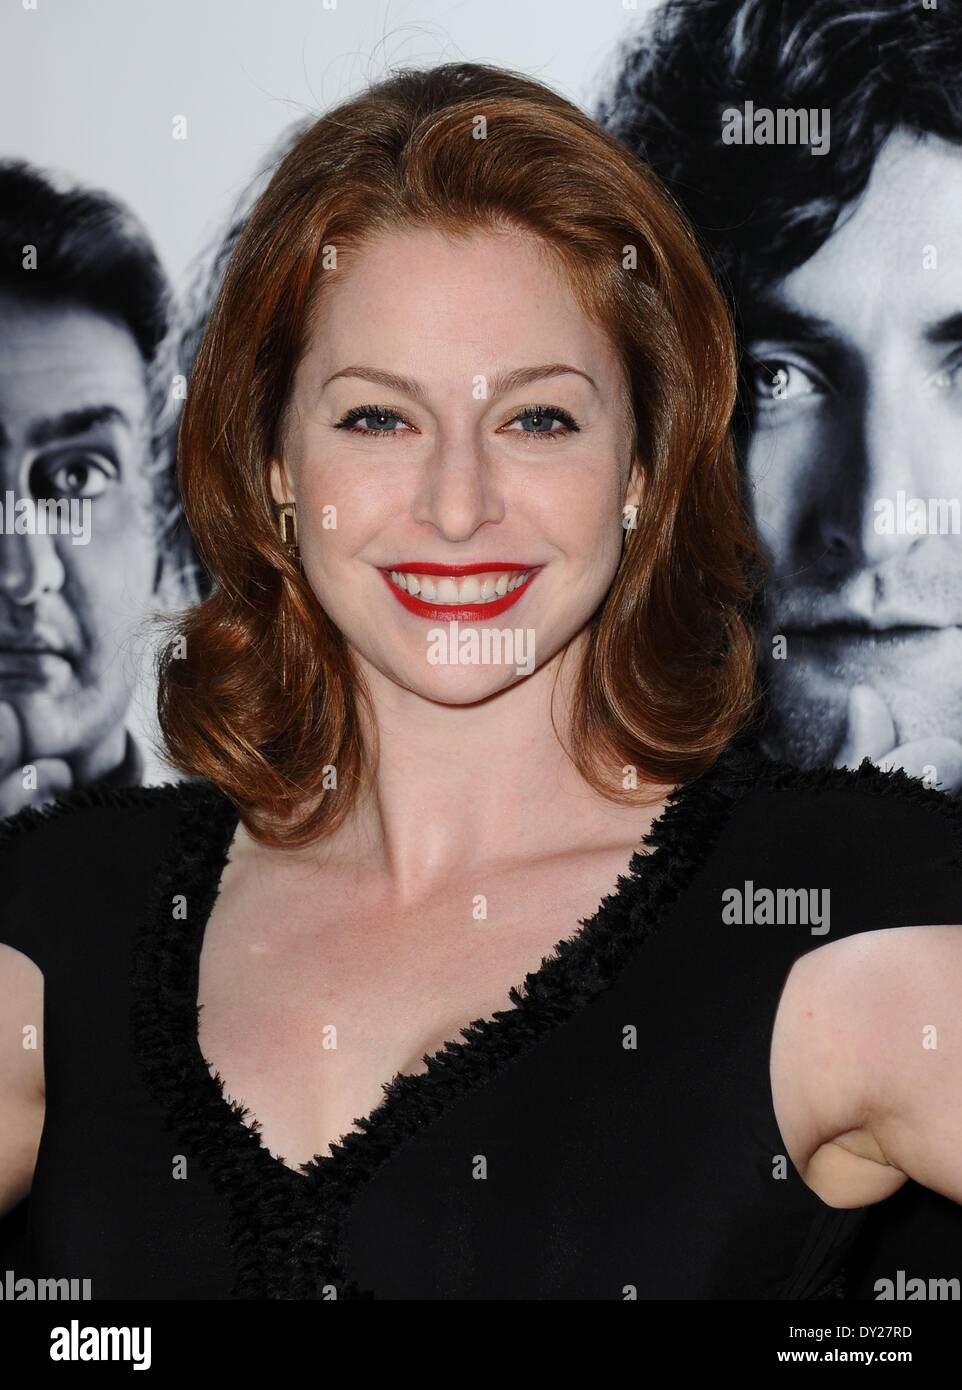 Los Angeles, CA, USA. 3rd Apr, 2014. Esme Bianco at arrivals for Premiere of HBO Comedy Series SILICON VALLEY, Paramount Pictures Studio Lot, Los Angeles, CA April 3, 2014. Credit:  Dee Cercone/Everett Collection/Alamy Live News Stock Photo